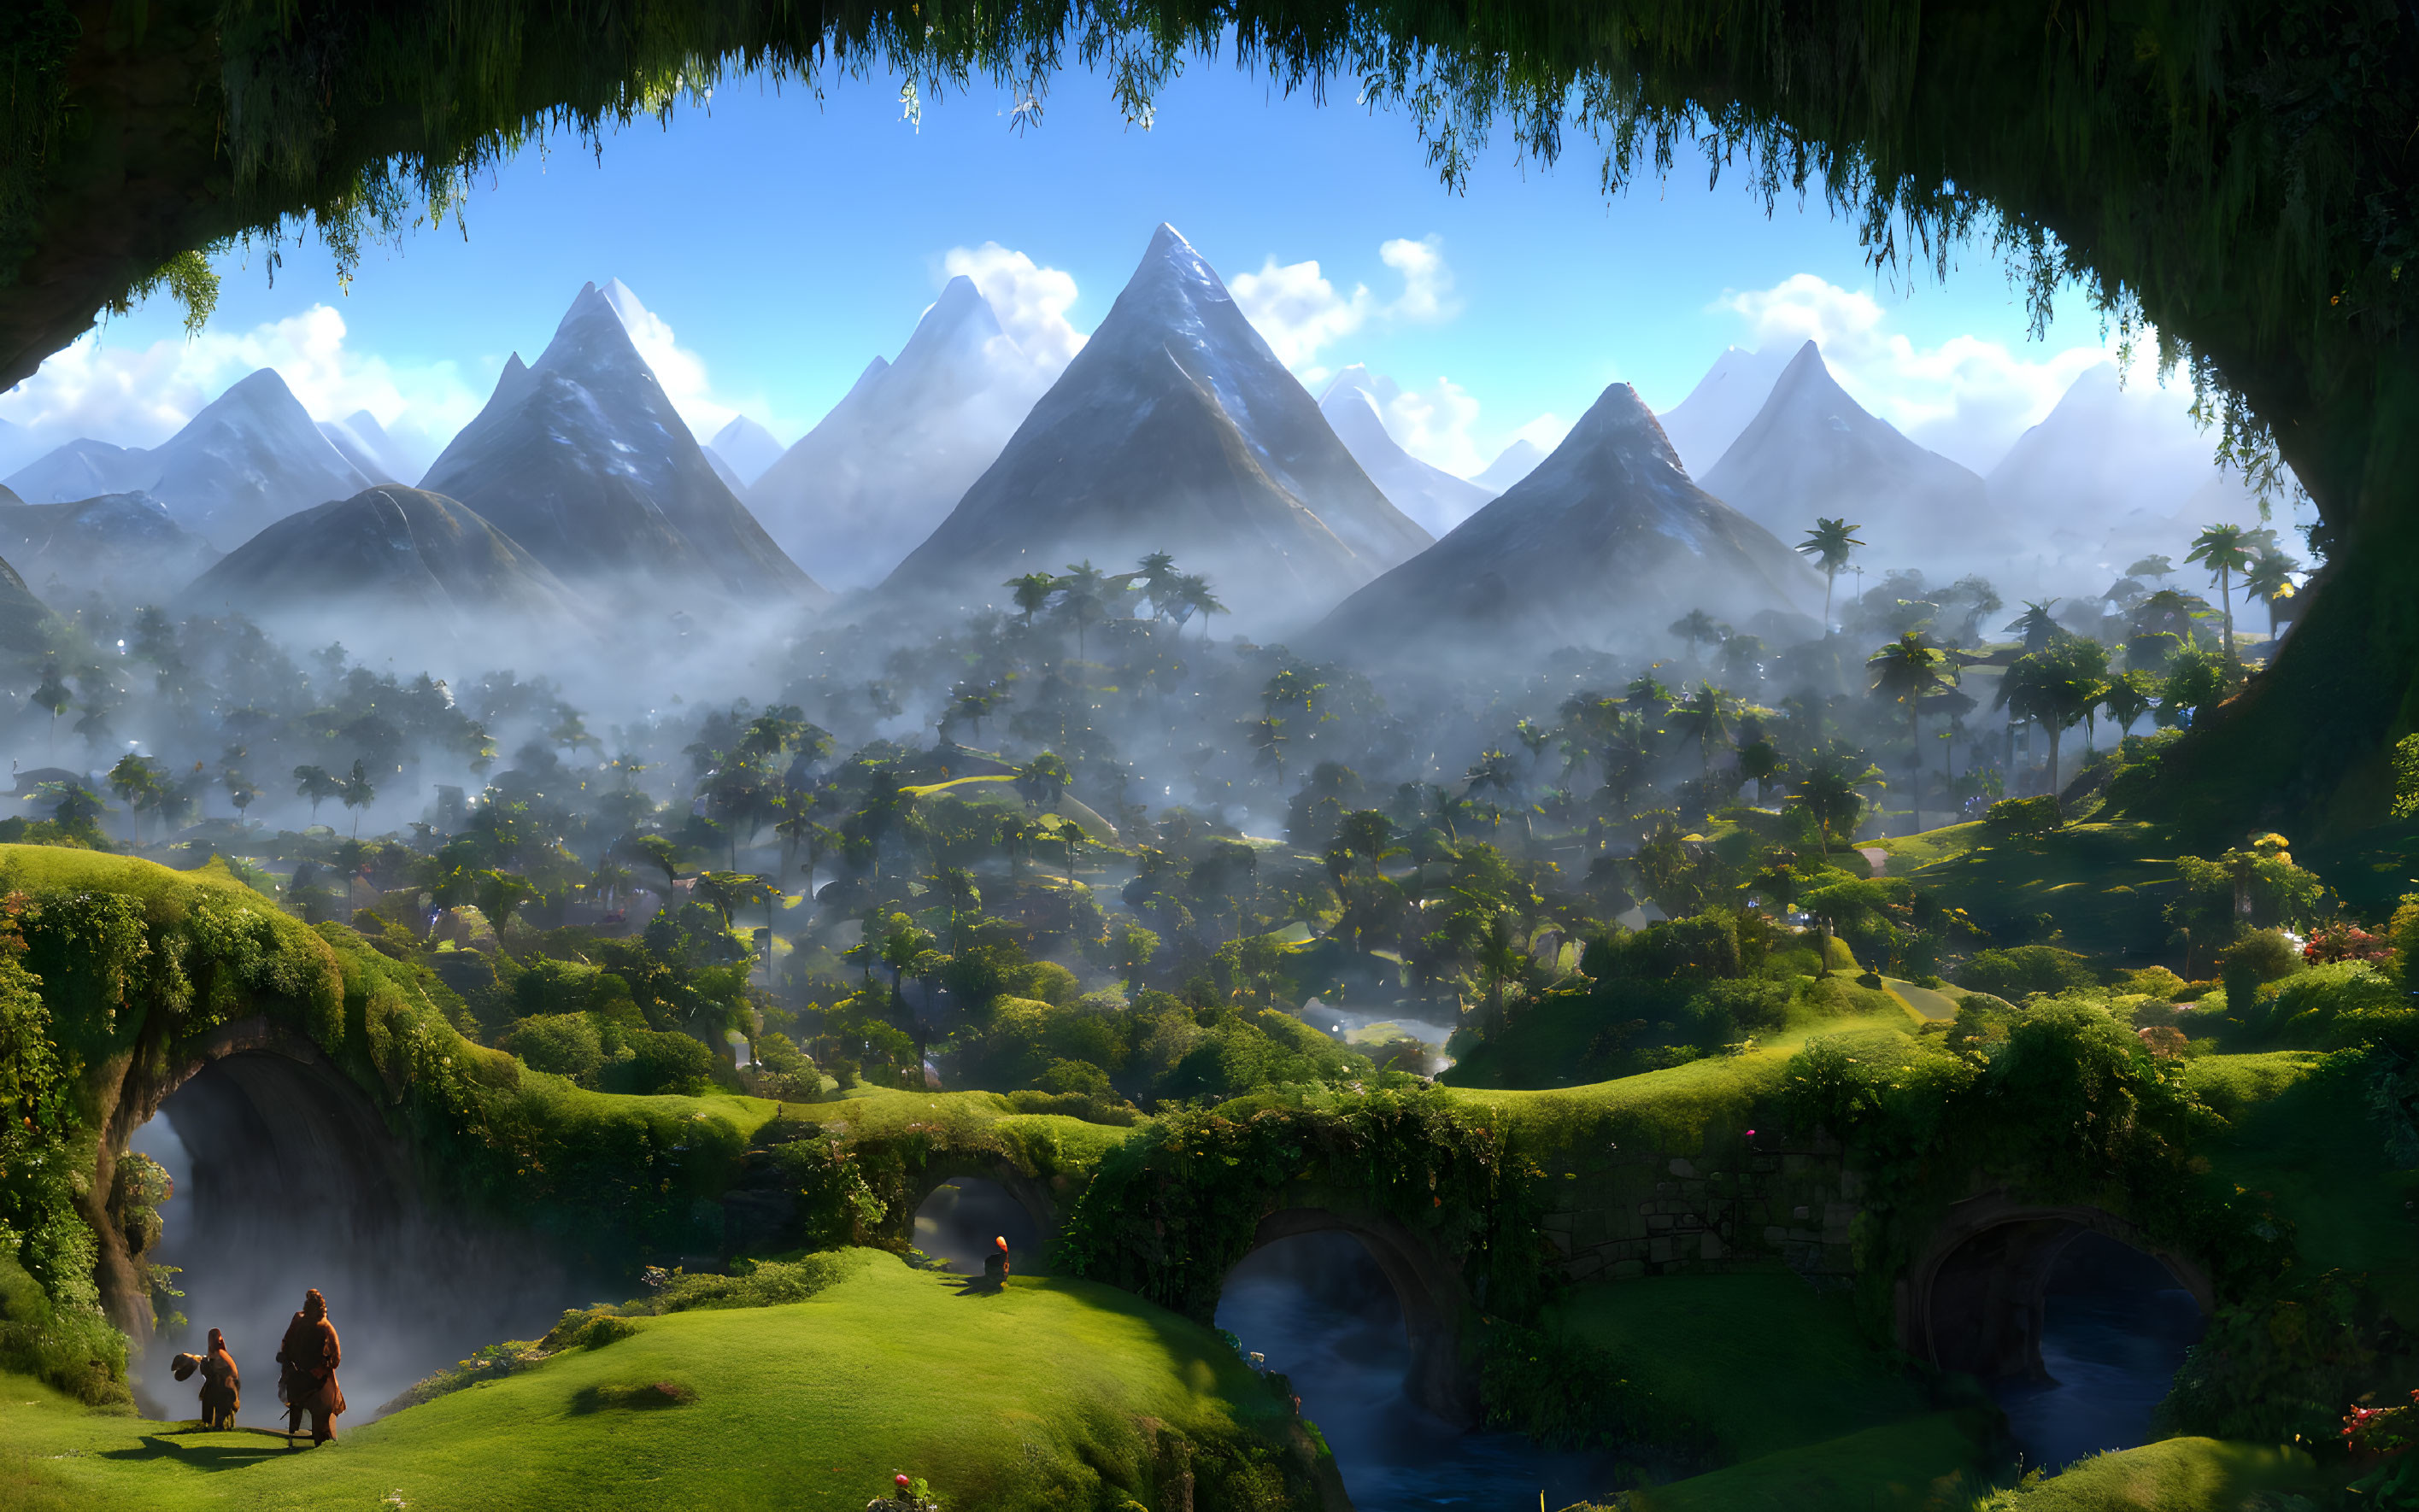 Fantastical landscape with lush greenery, misty mountains, characters by bridge